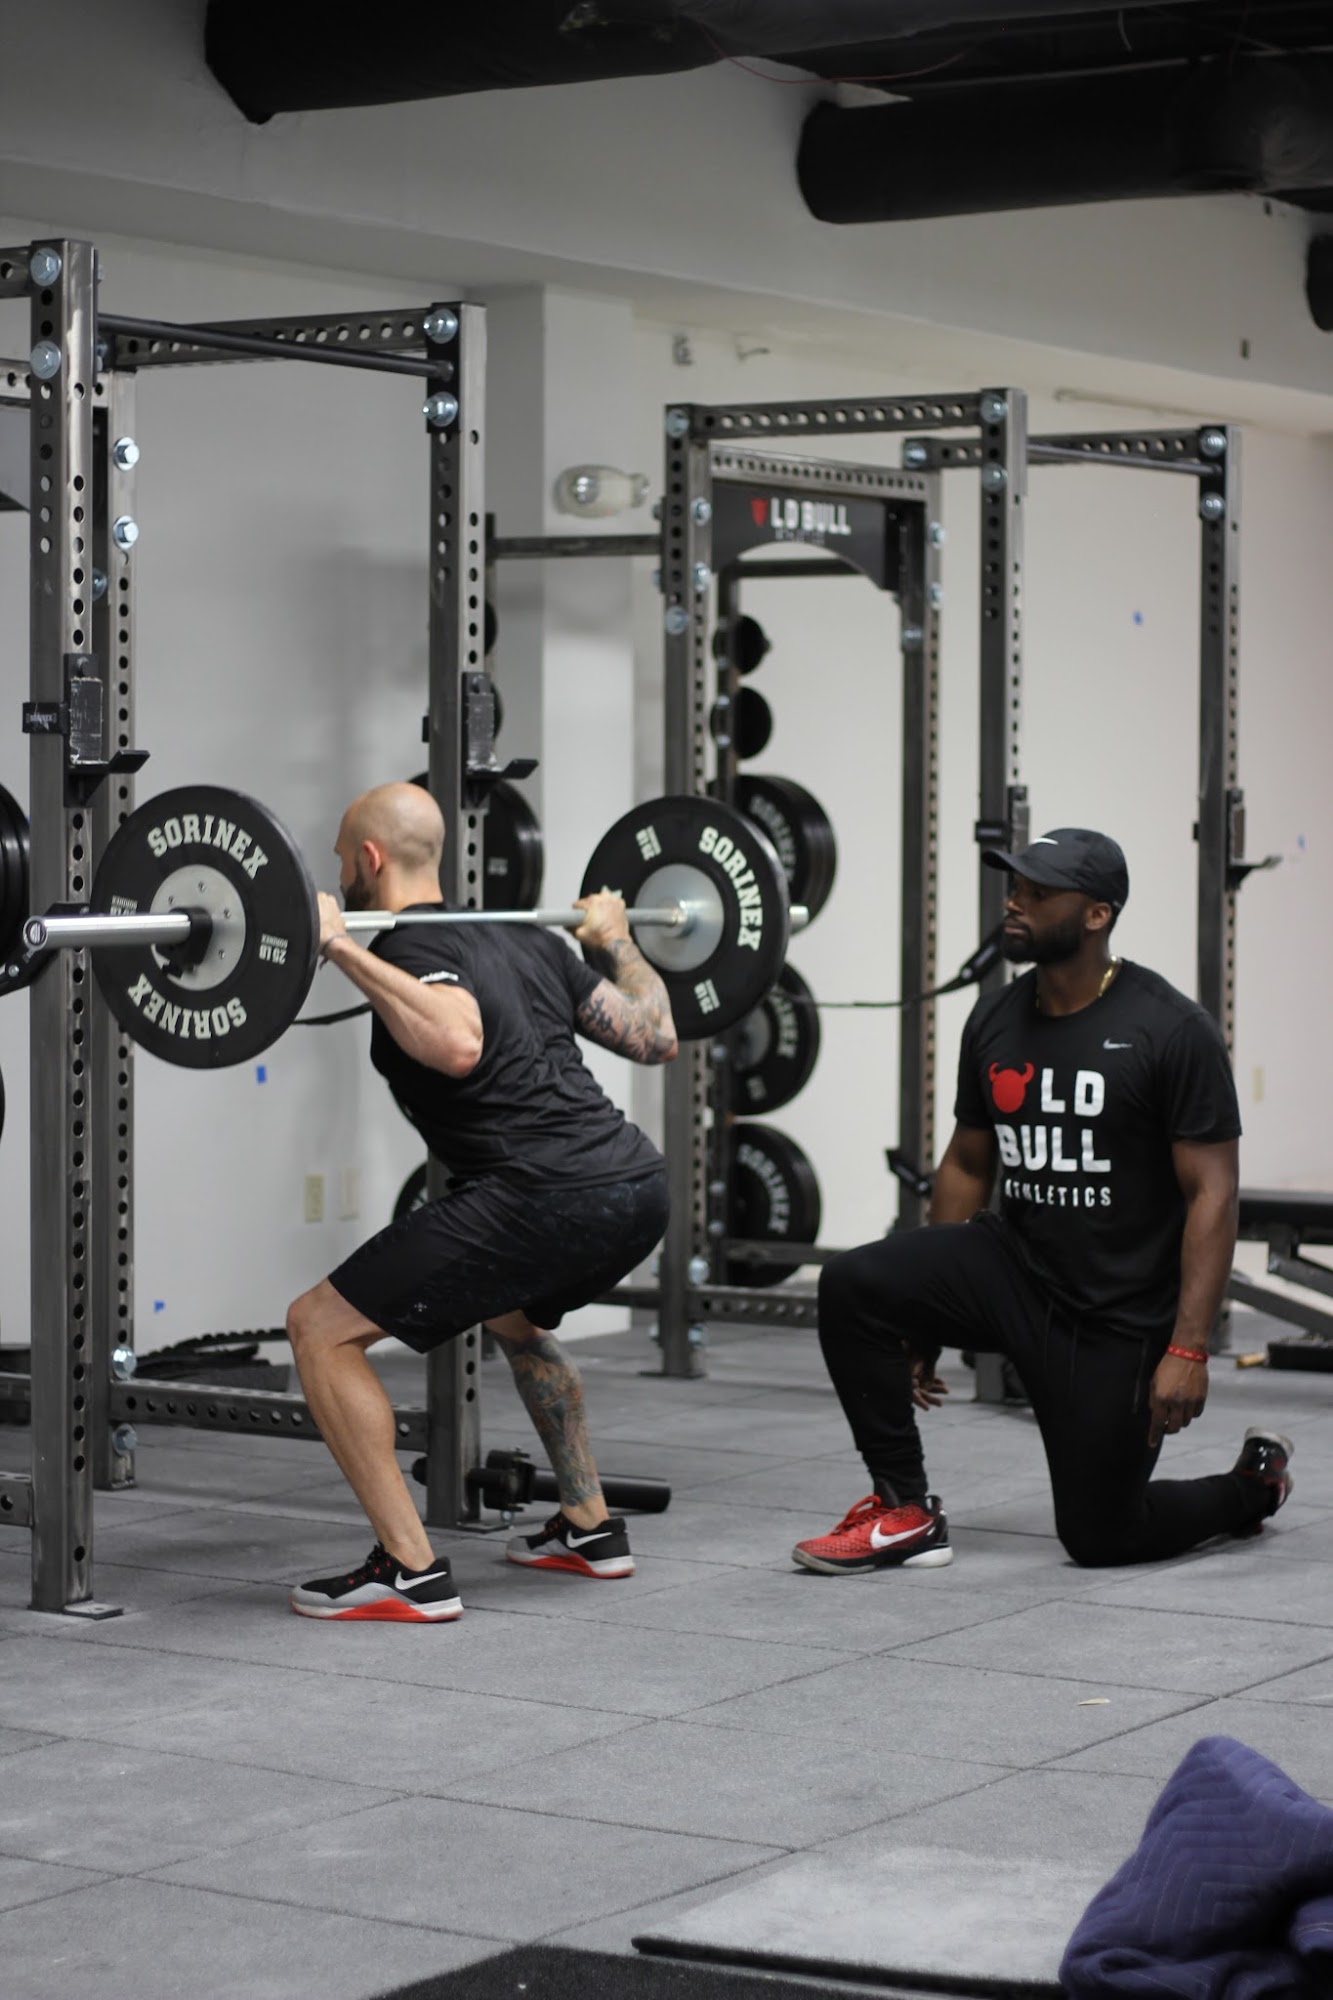 Old Bull Athletics: 1 on 1 Personal Training and Physical Therapy in Coral Gables